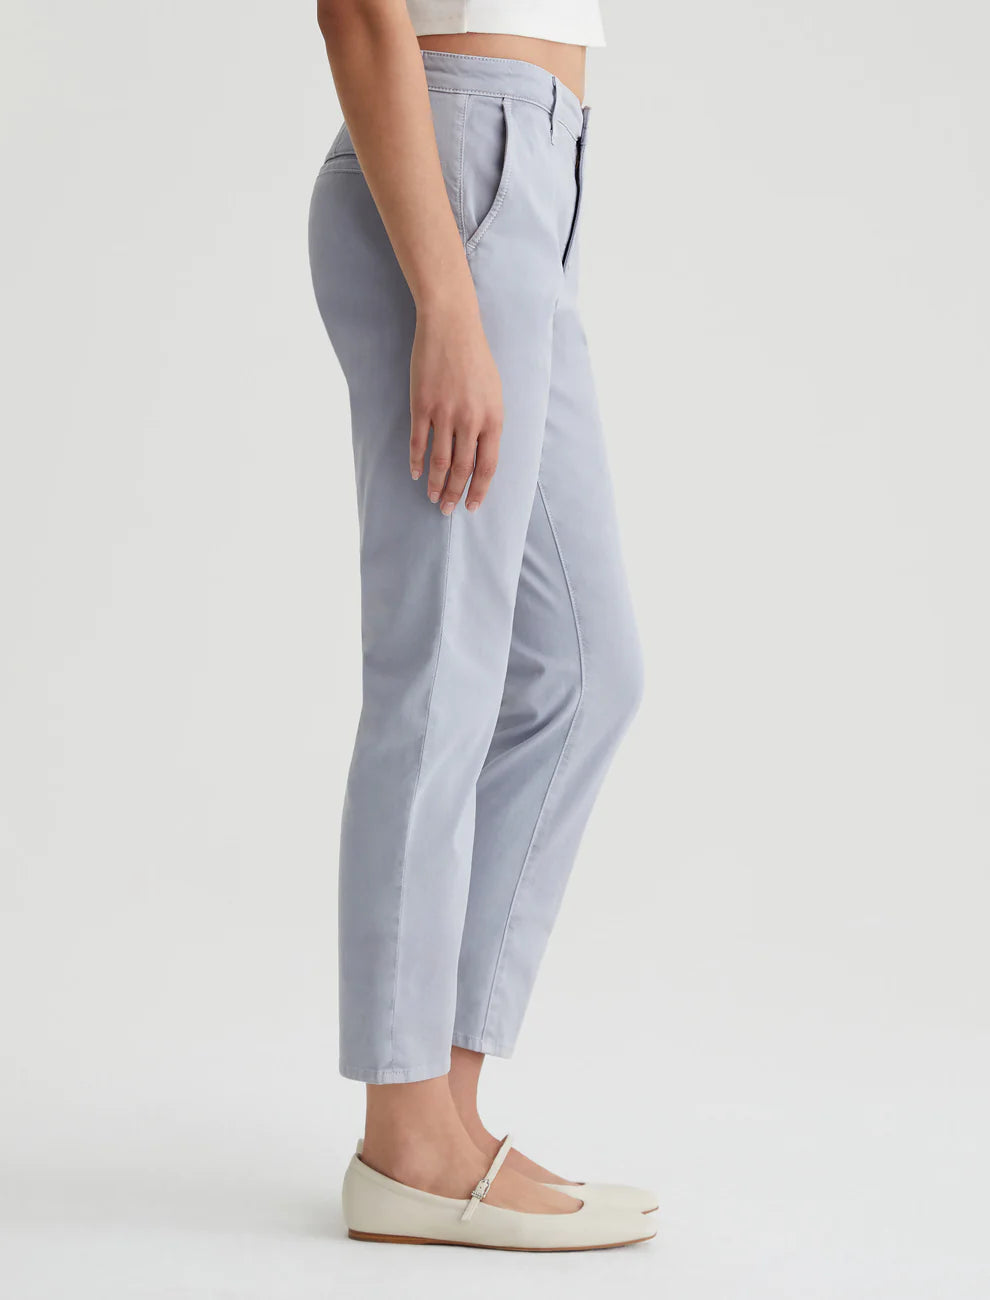 Caden Tailored Trouser in sulfur blue ice by AG